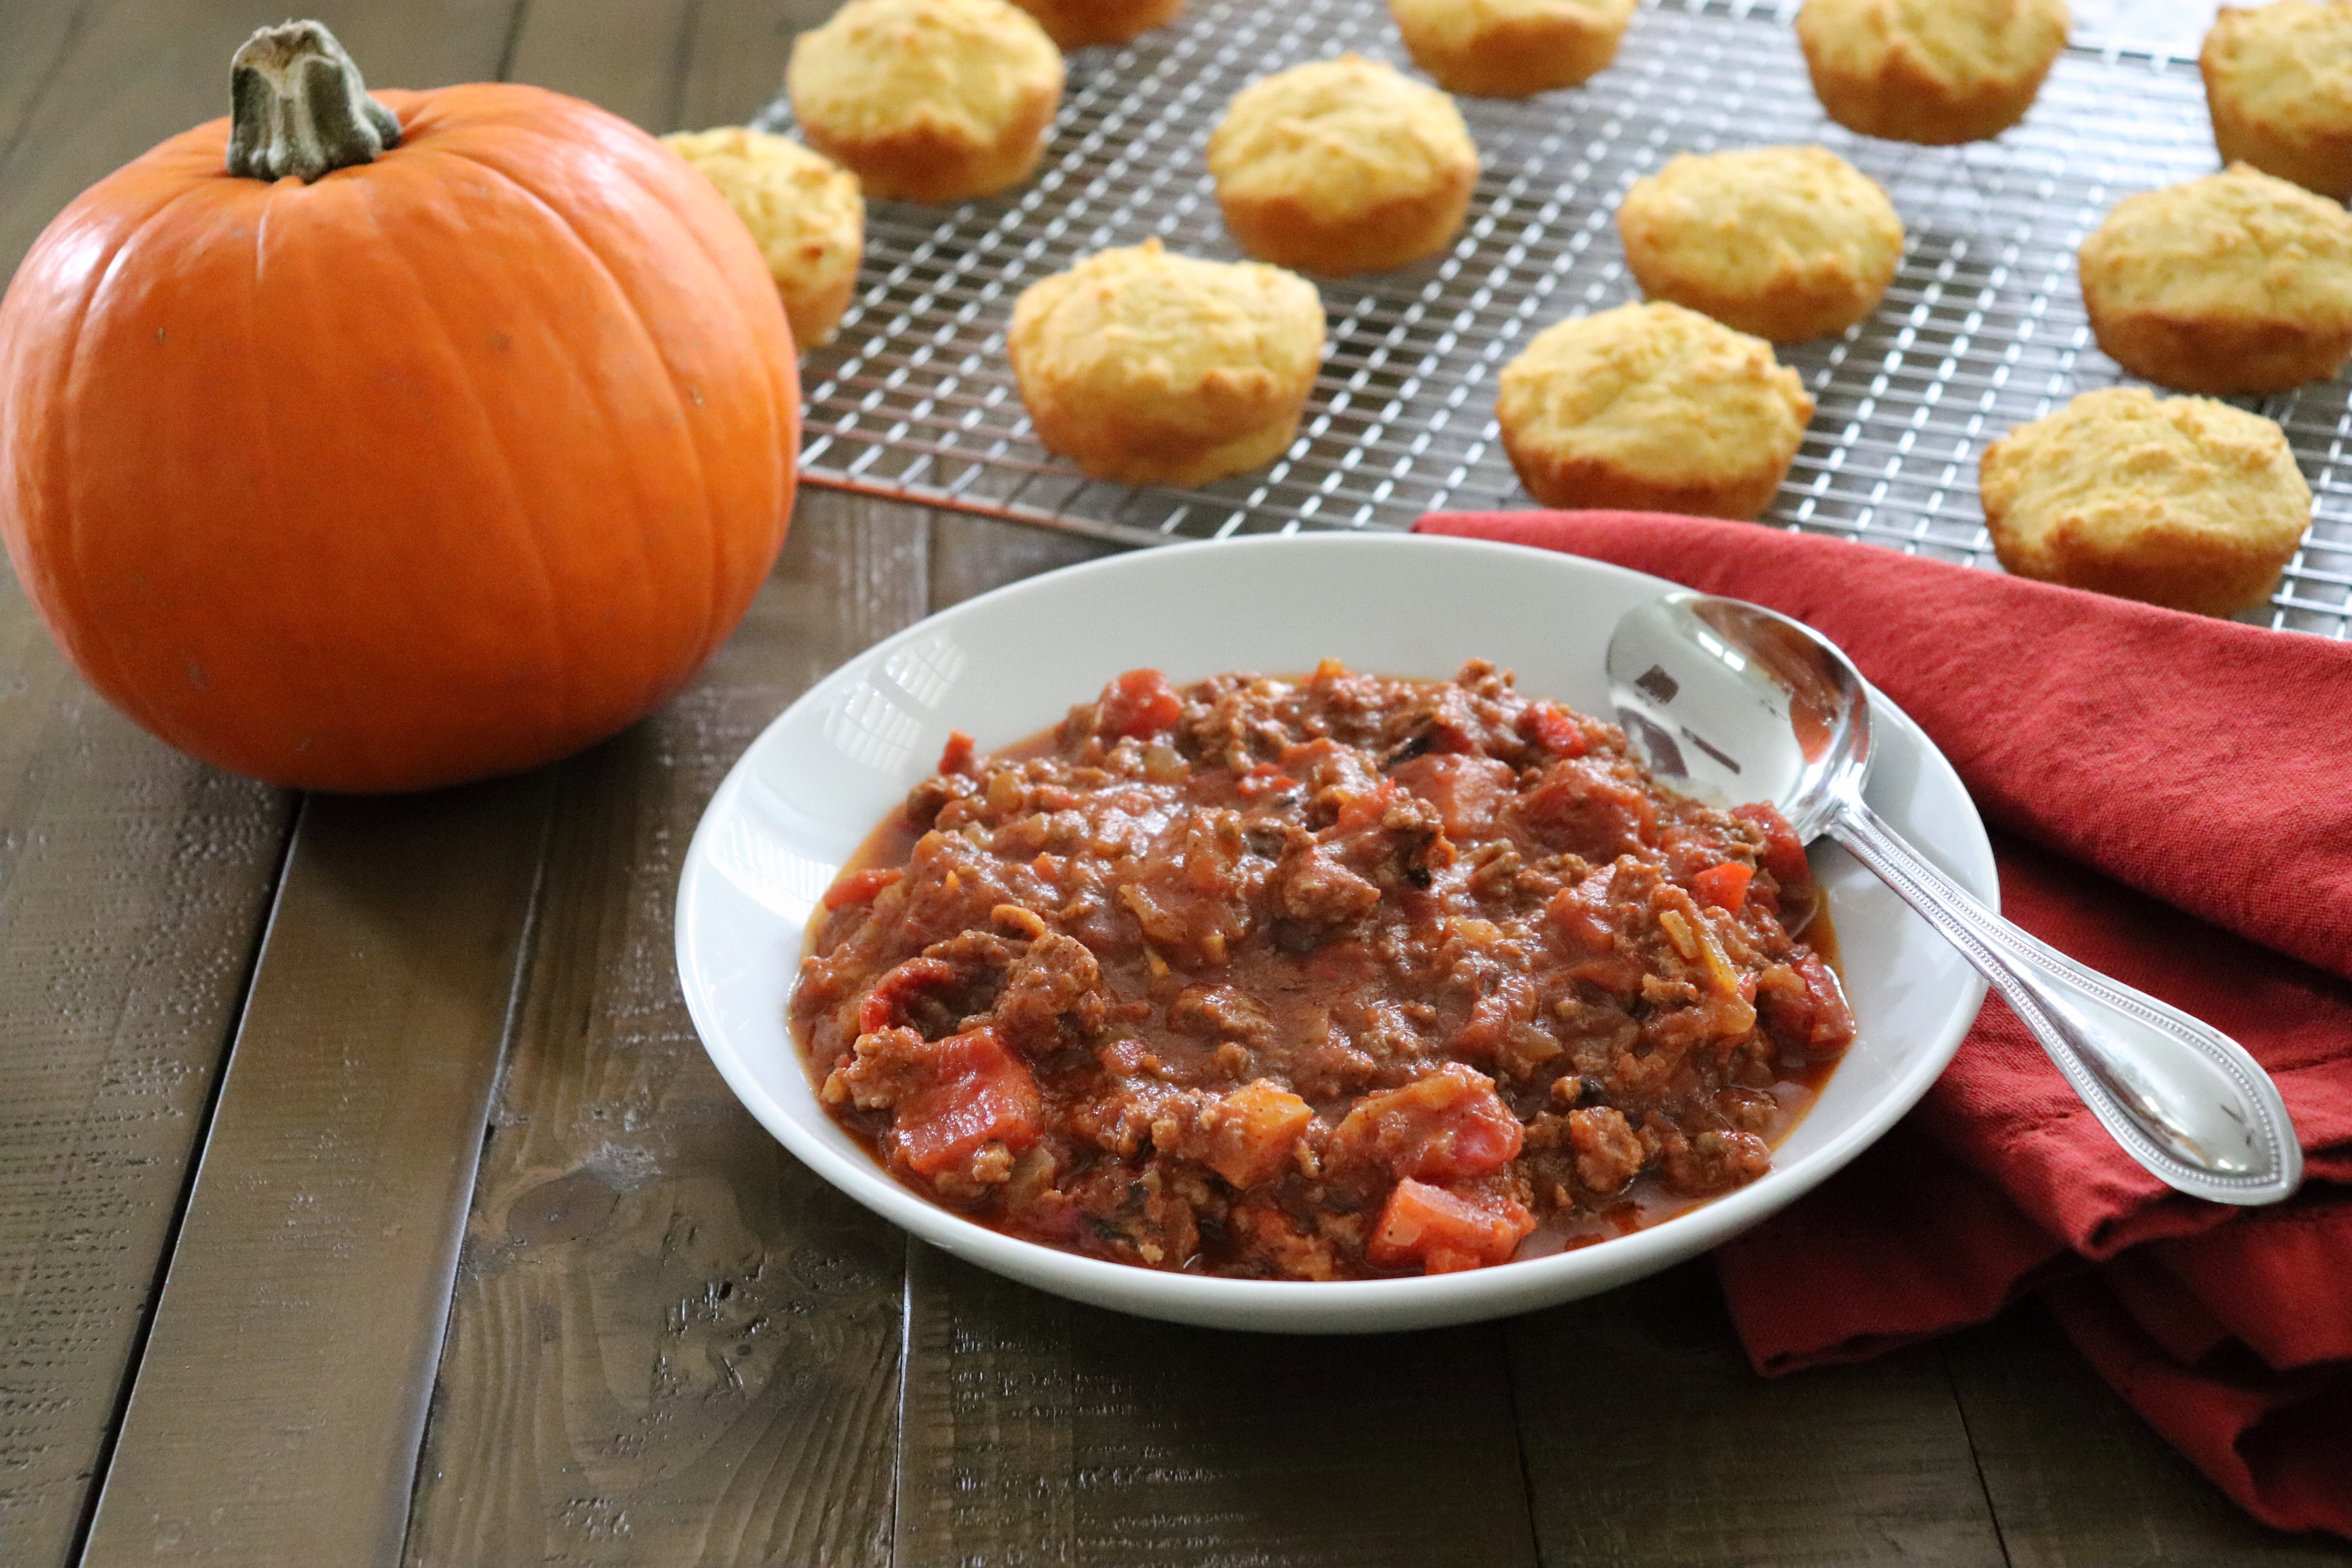 Bowl of Pumpkin Chili with cornbread muffins and a small pumpkin in the background